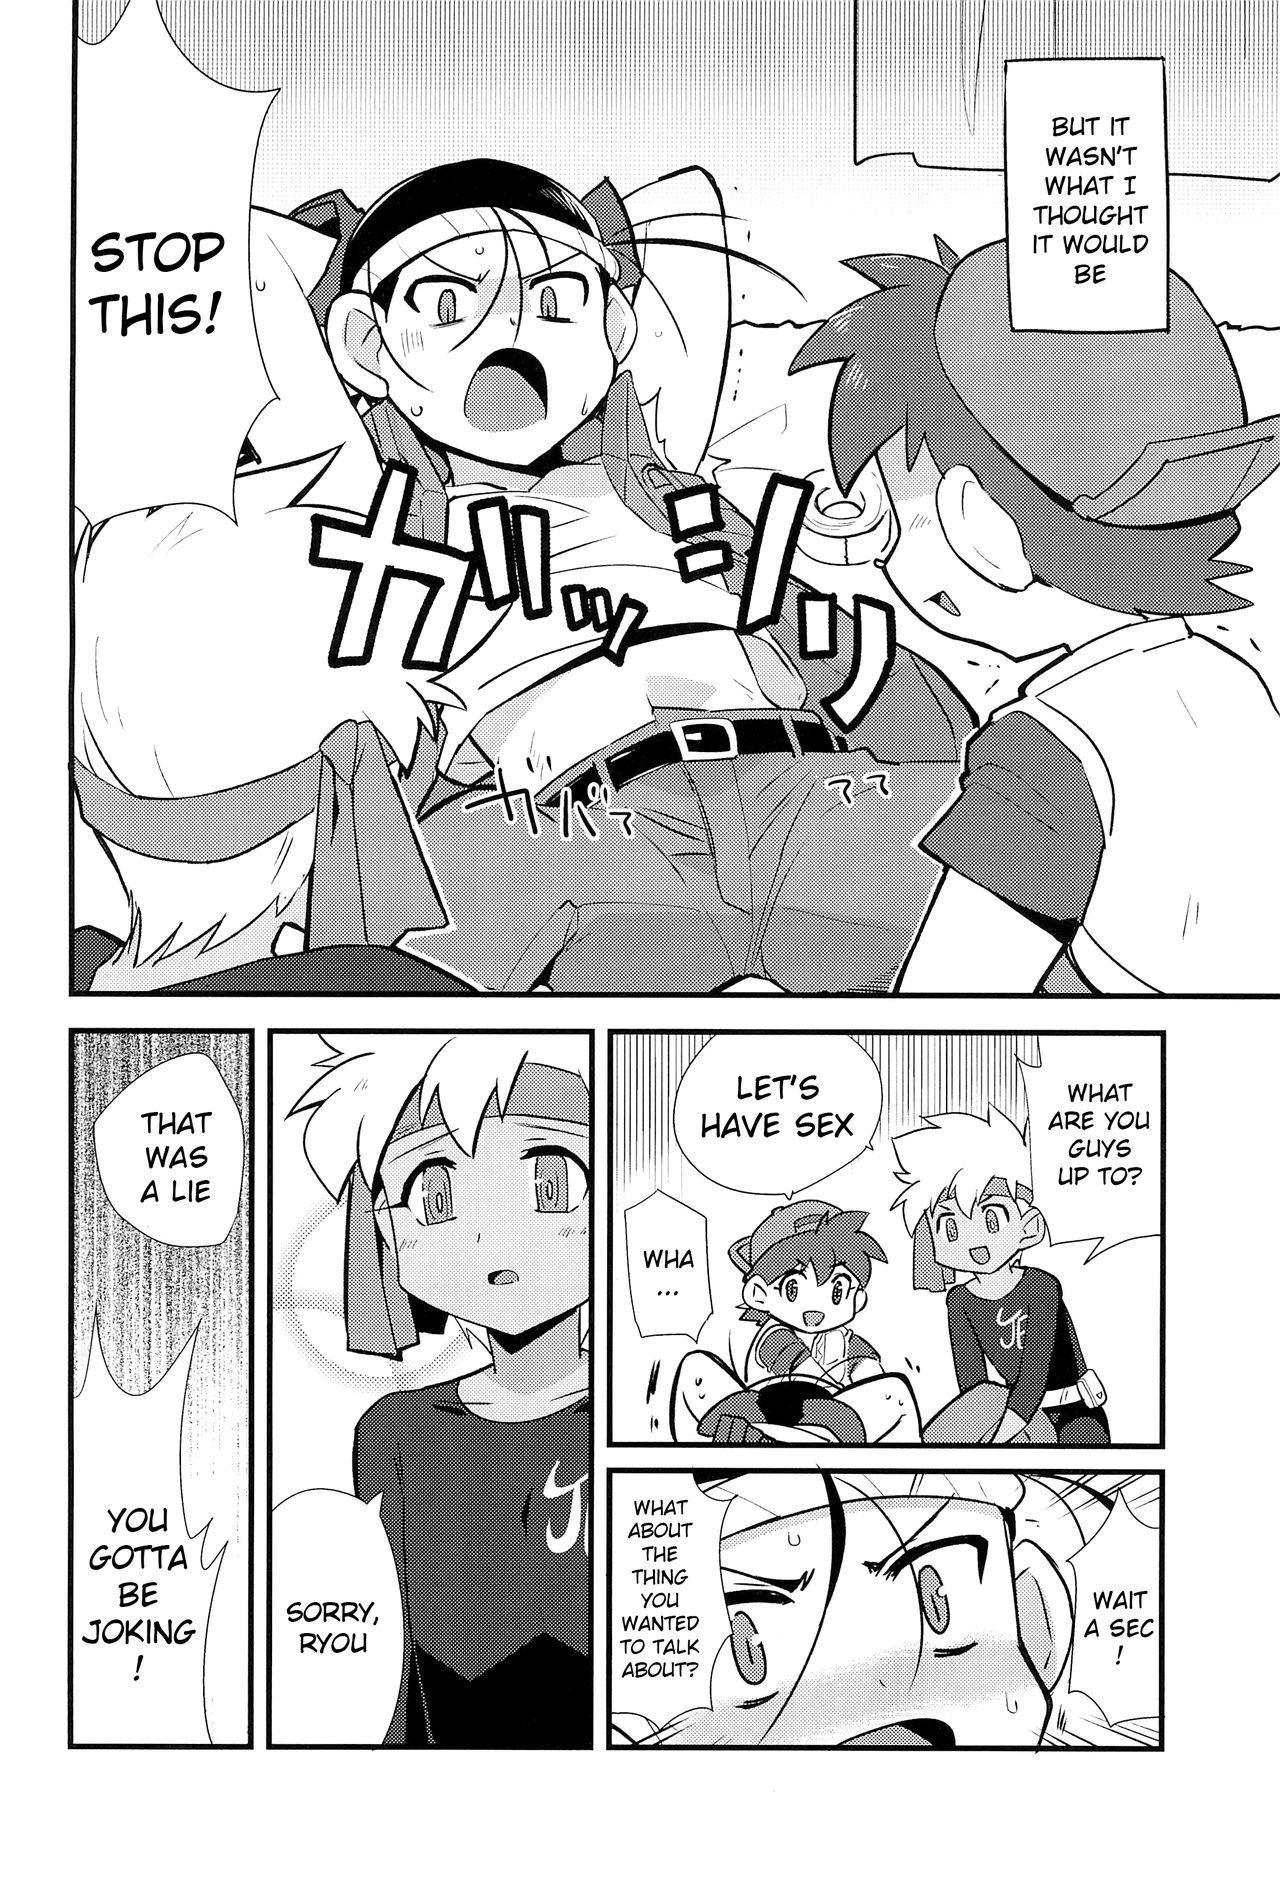 Lesbians Try Shichau? | Wanna Try It? - Bakusou kyoudai lets and go Swallowing - Page 3